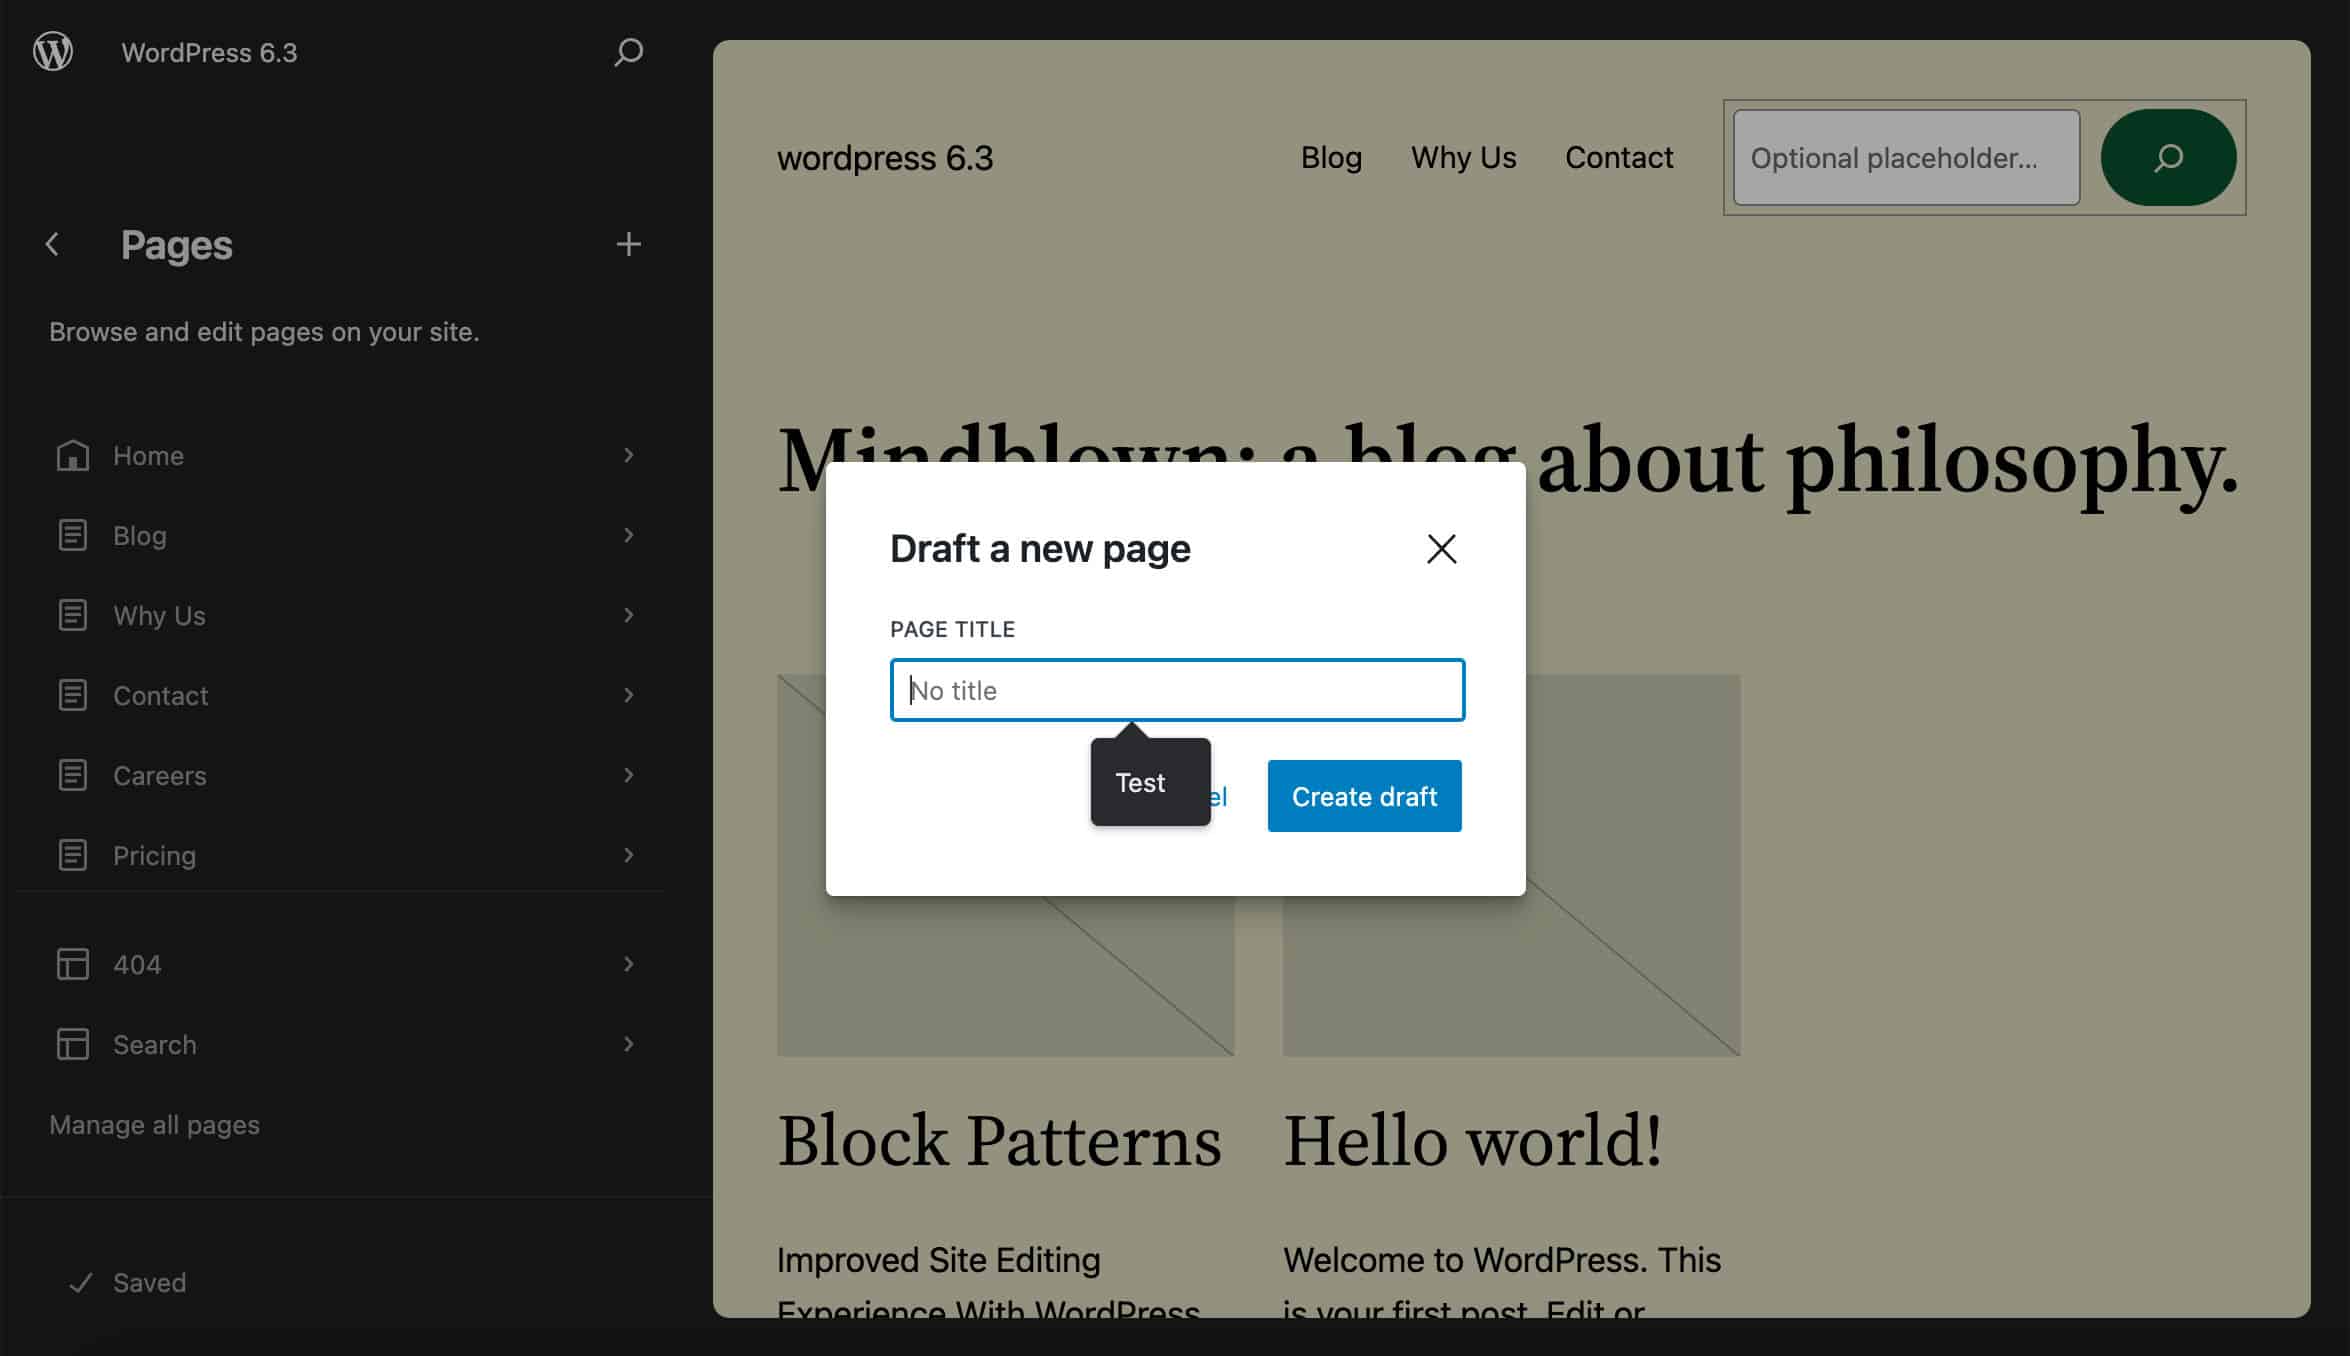 Draft a new page in WordPress 6.3